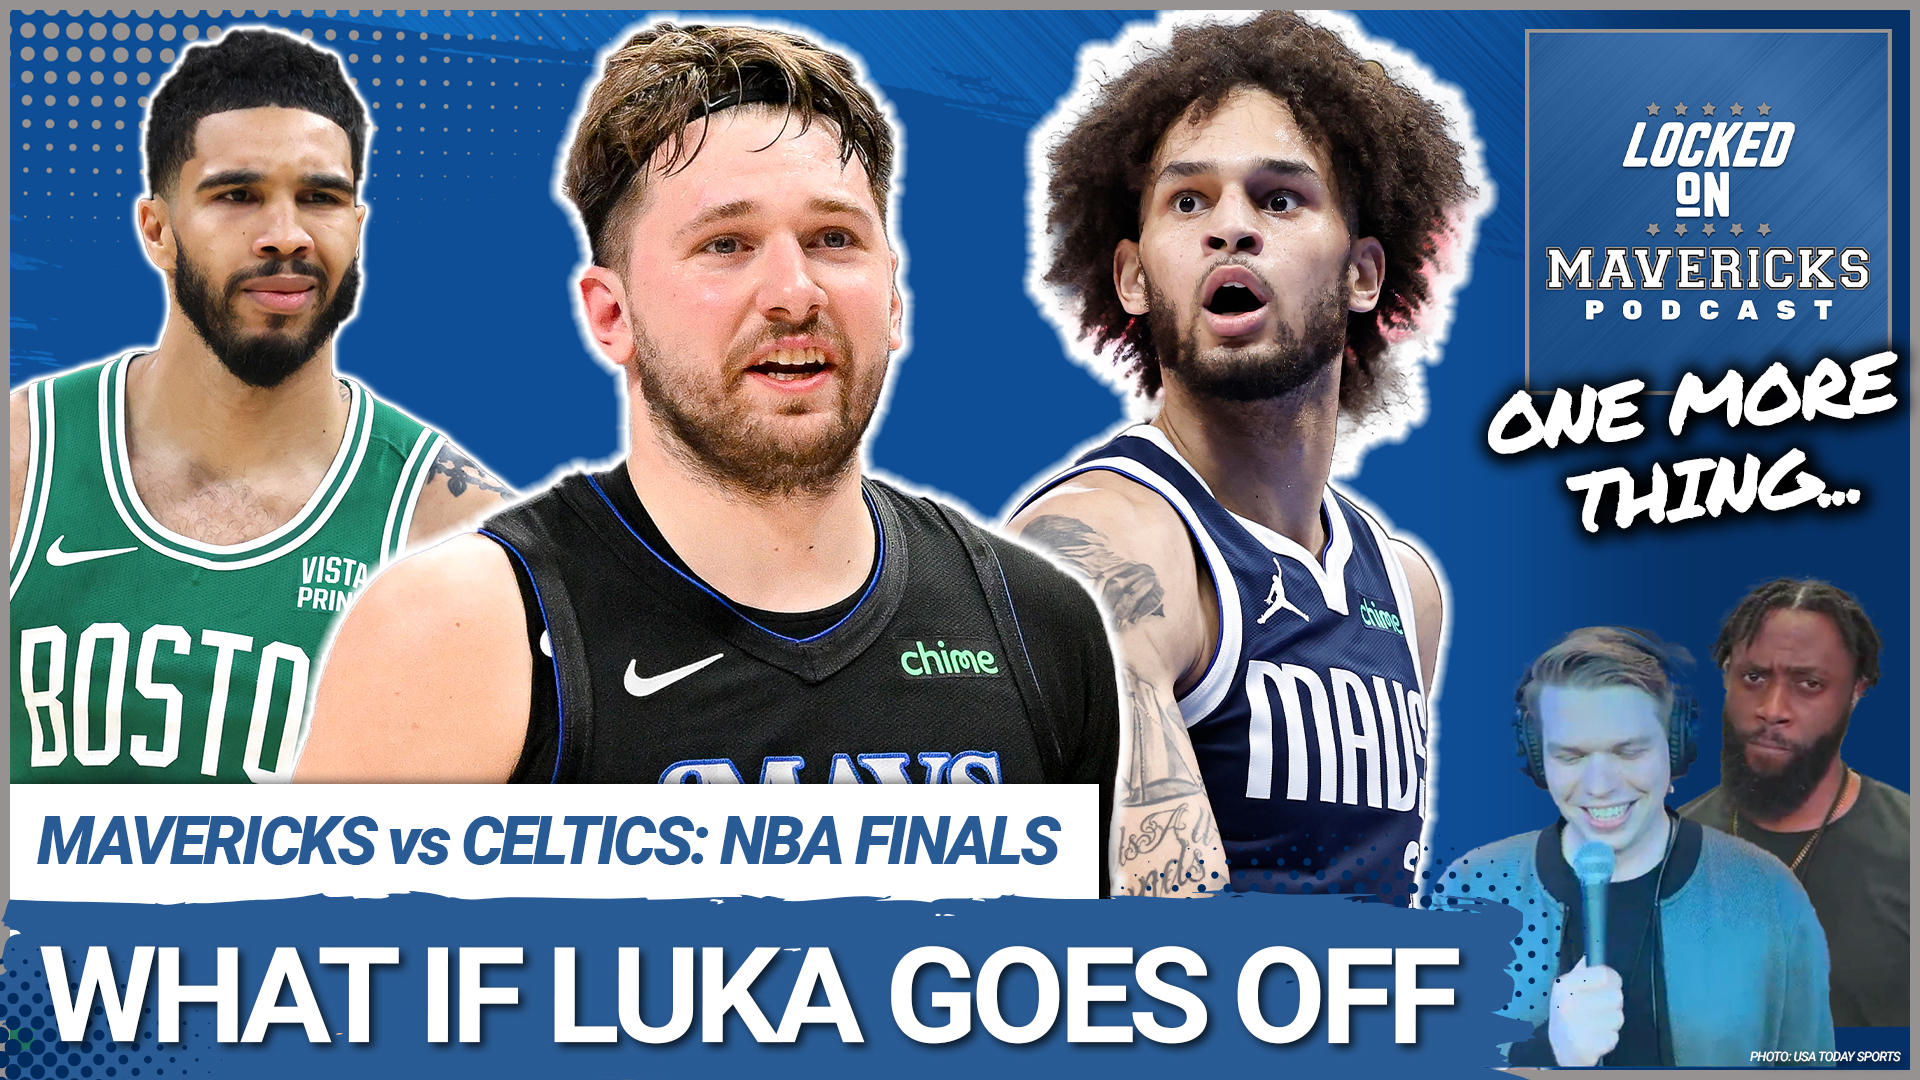 Nick Angstadt & Reggie Adetula share one more thing about Luka Doncic, Dereck Lively II, and Daniel Gafford playing the Boston Celtics in the NBA Finals.